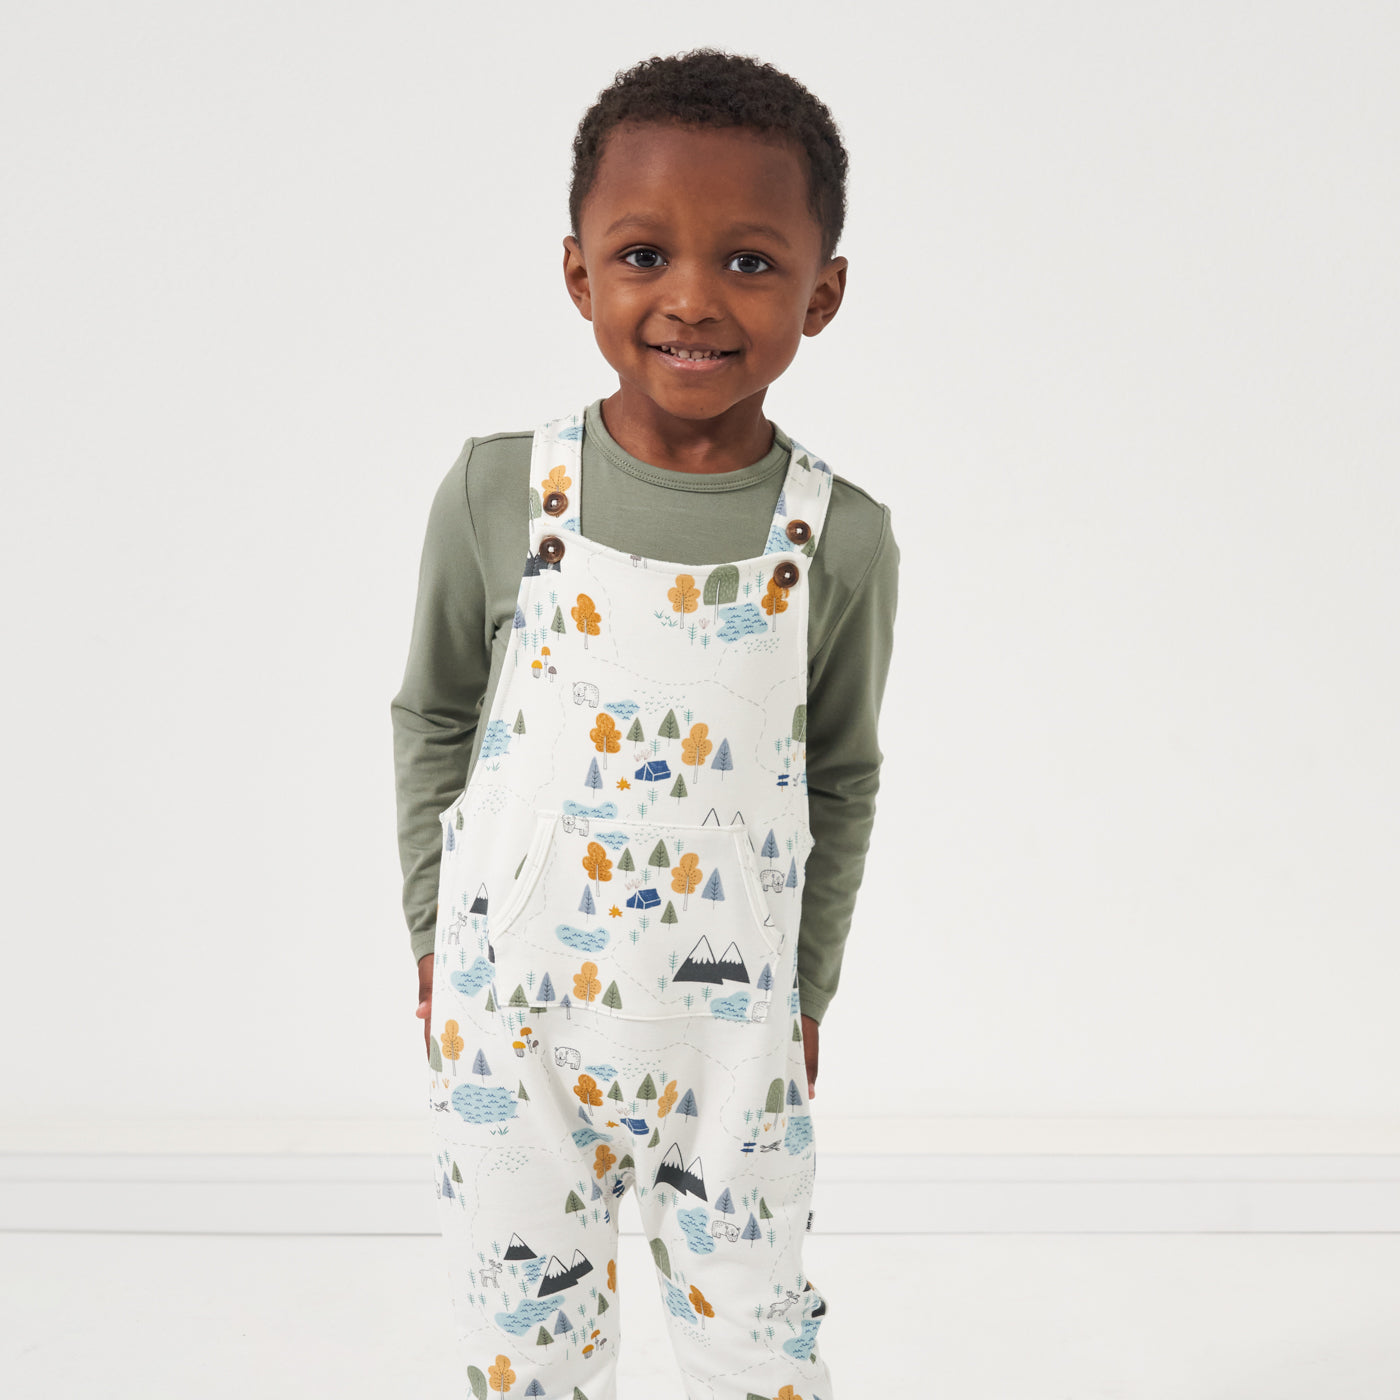 Child wearing a Moss classic tee and coordinating Let's Explore printed overall